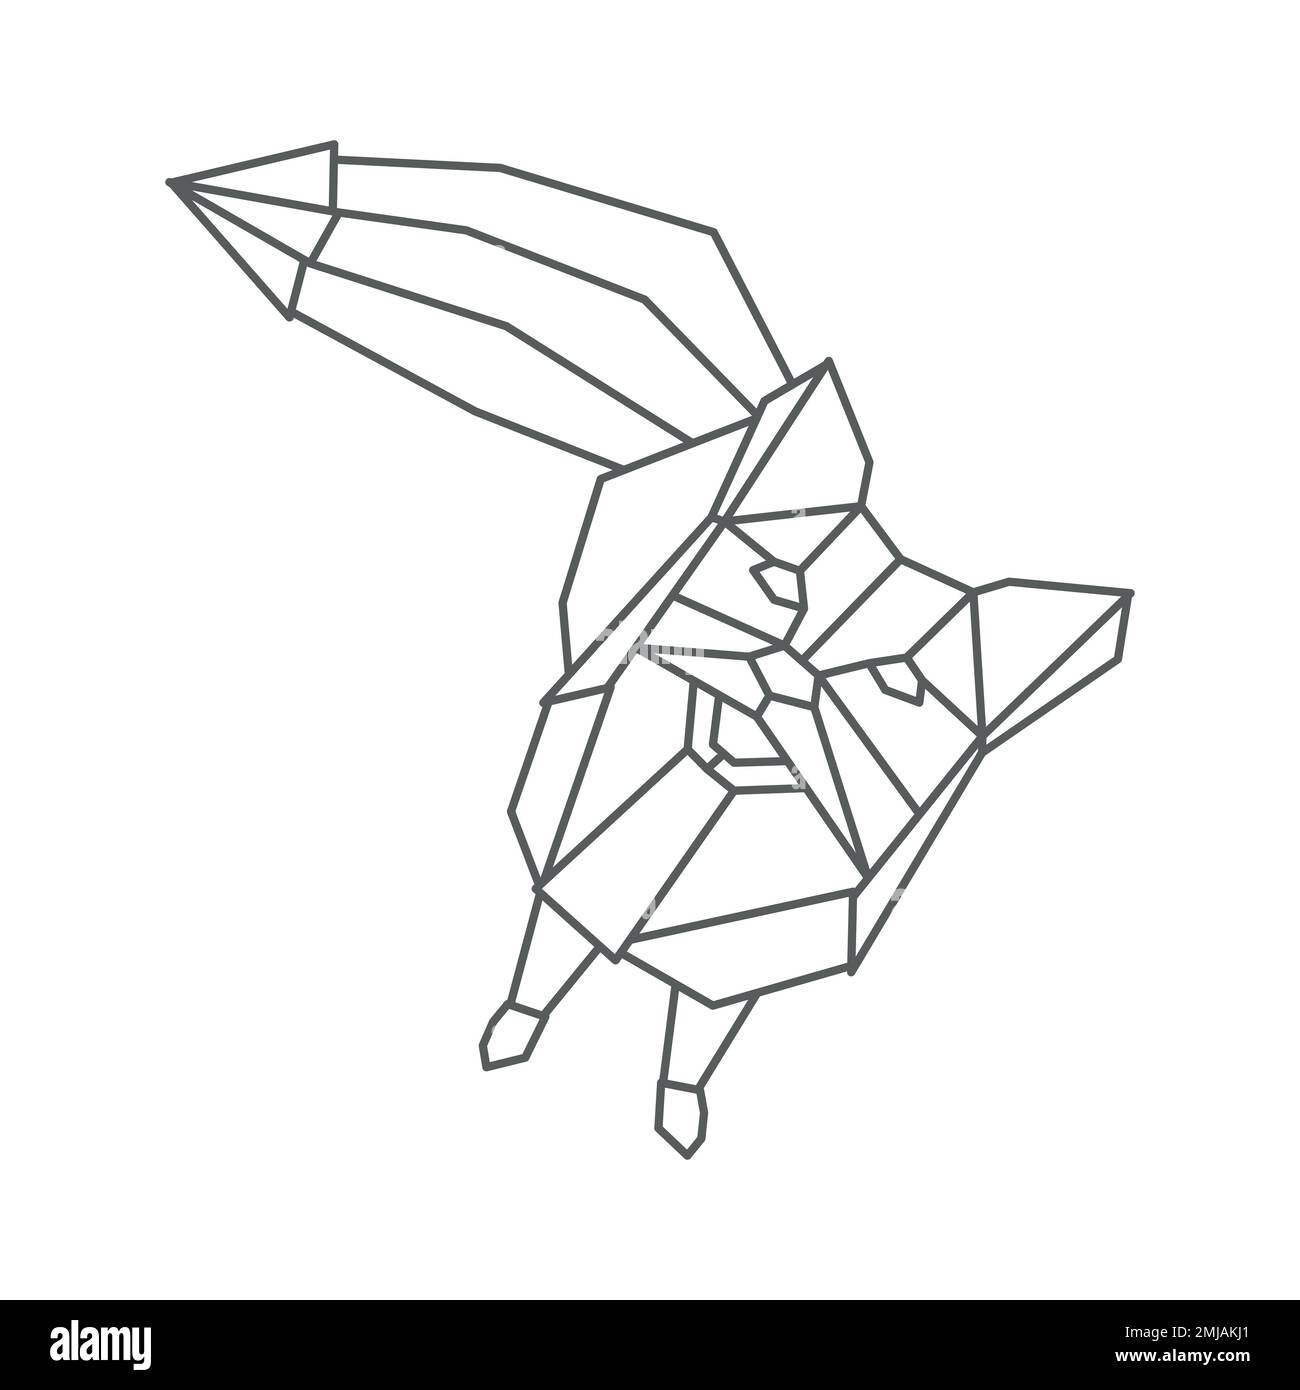 Cute fox is sitting looking up. Geometric linear wild animal. Abstract minimalistic illustration. Stylish modern clipart for design of branded product Stock Vector